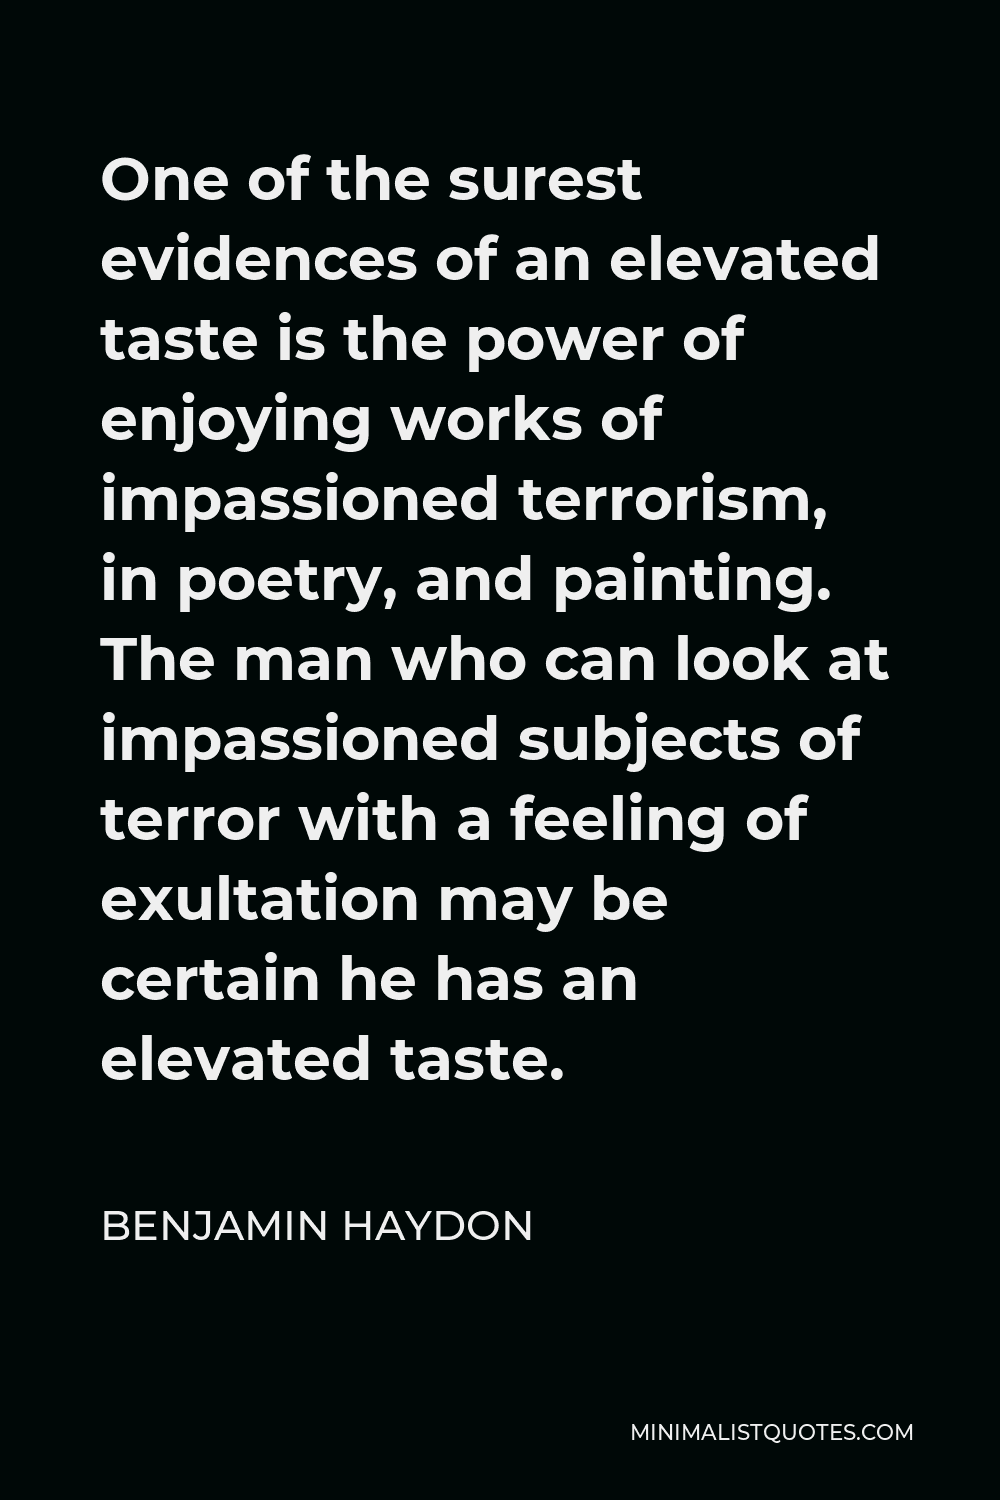 Benjamin Haydon Quote - One of the surest evidences of an elevated taste is the power of enjoying works of impassioned terrorism, in poetry, and painting. The man who can look at impassioned subjects of terror with a feeling of exultation may be certain he has an elevated taste.